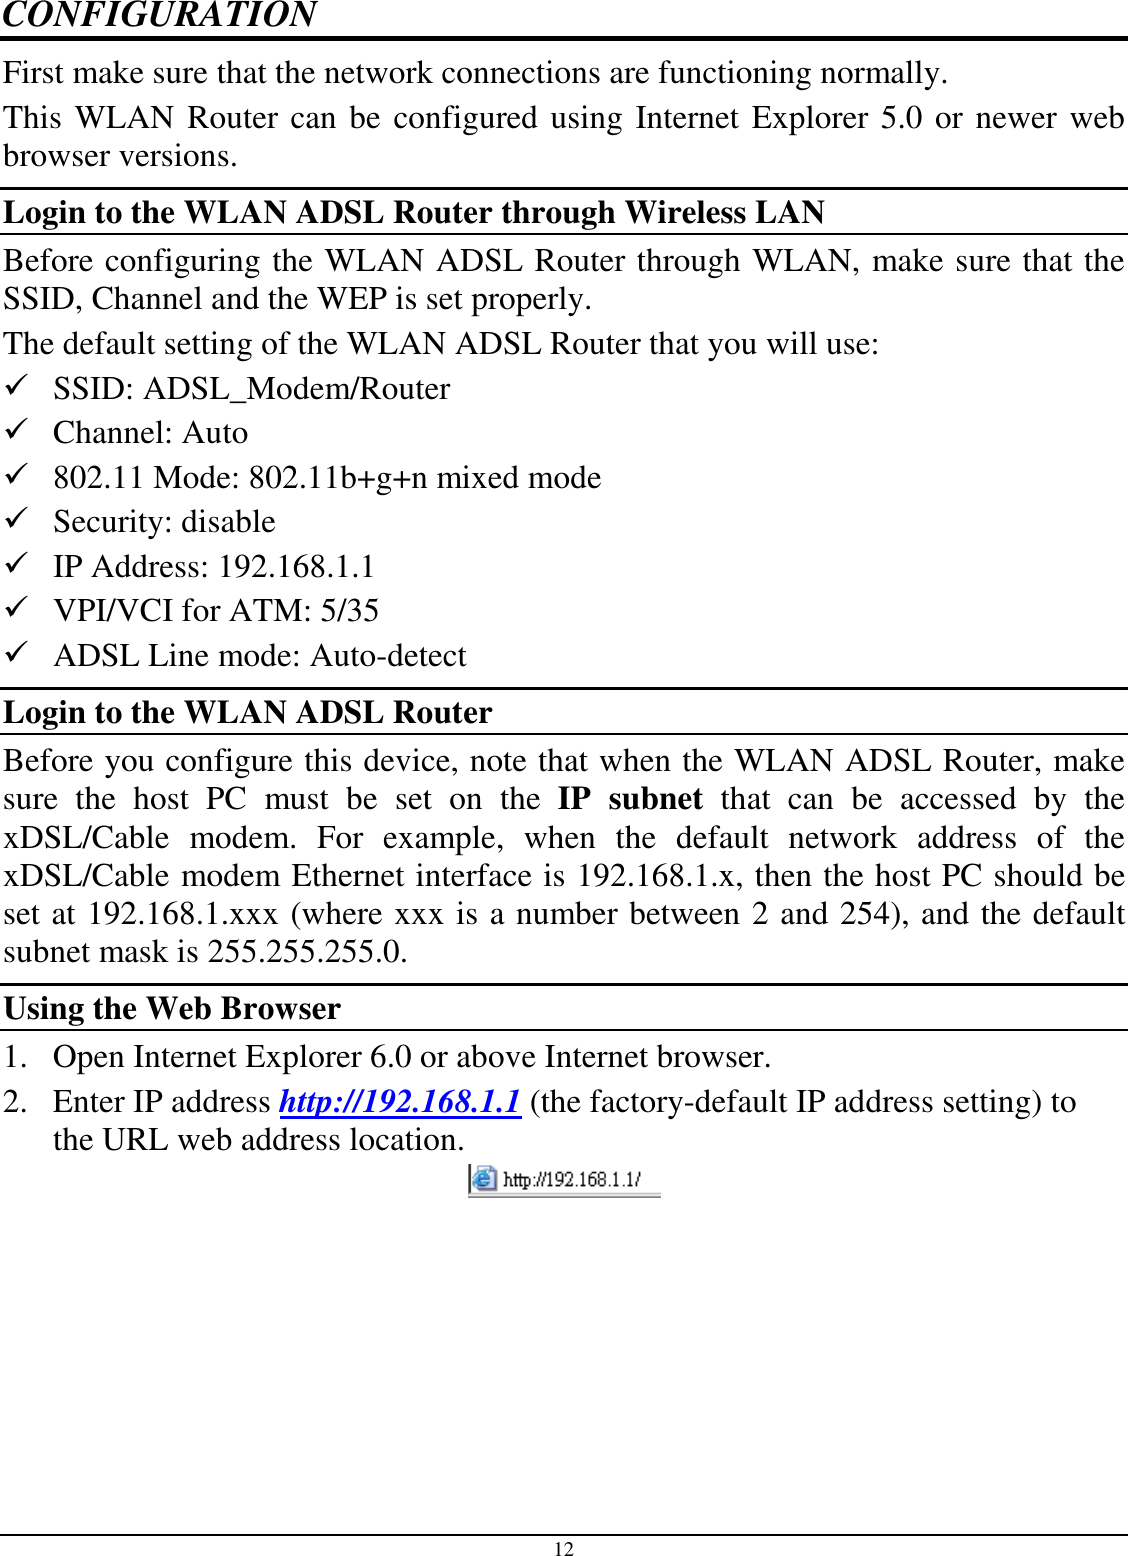 12 CONFIGURATION First make sure that the network connections are functioning normally.  This WLAN Router can be configured using Internet Explorer 5.0 or newer web browser versions. Login to the WLAN ADSL Router through Wireless LAN Before configuring the WLAN ADSL Router through WLAN, make sure that the SSID, Channel and the WEP is set properly. The default setting of the WLAN ADSL Router that you will use:  SSID: ADSL_Modem/Router  Channel: Auto  802.11 Mode: 802.11b+g+n mixed mode  Security: disable  IP Address: 192.168.1.1  VPI/VCI for ATM: 5/35  ADSL Line mode: Auto-detect Login to the WLAN ADSL Router Before you configure this device, note that when the WLAN ADSL Router, make sure  the  host  PC  must  be  set  on  the  IP  subnet  that  can  be  accessed  by  the xDSL/Cable  modem.  For  example,  when  the  default  network  address  of  the xDSL/Cable modem Ethernet interface is 192.168.1.x, then the host PC should be set at 192.168.1.xxx (where xxx is a number between 2 and 254), and the default subnet mask is 255.255.255.0. Using the Web Browser 1. Open Internet Explorer 6.0 or above Internet browser. 2. Enter IP address http://192.168.1.1 (the factory-default IP address setting) to the URL web address location.  